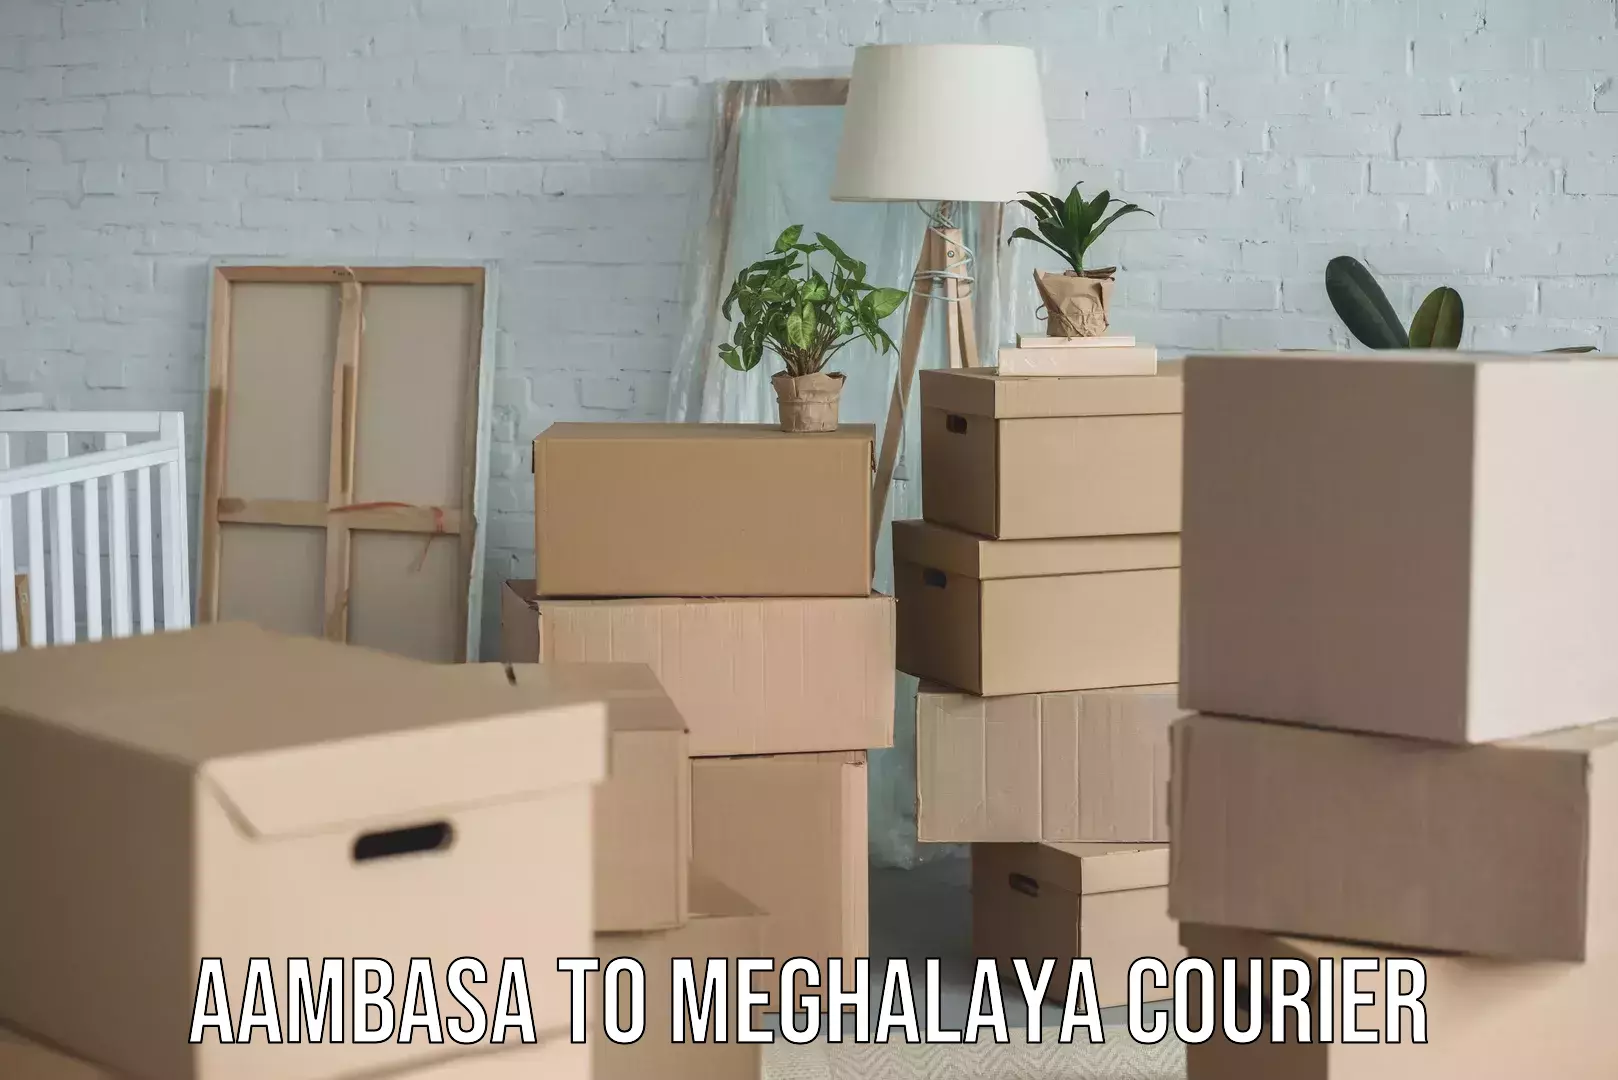 24-hour courier services Aambasa to Meghalaya